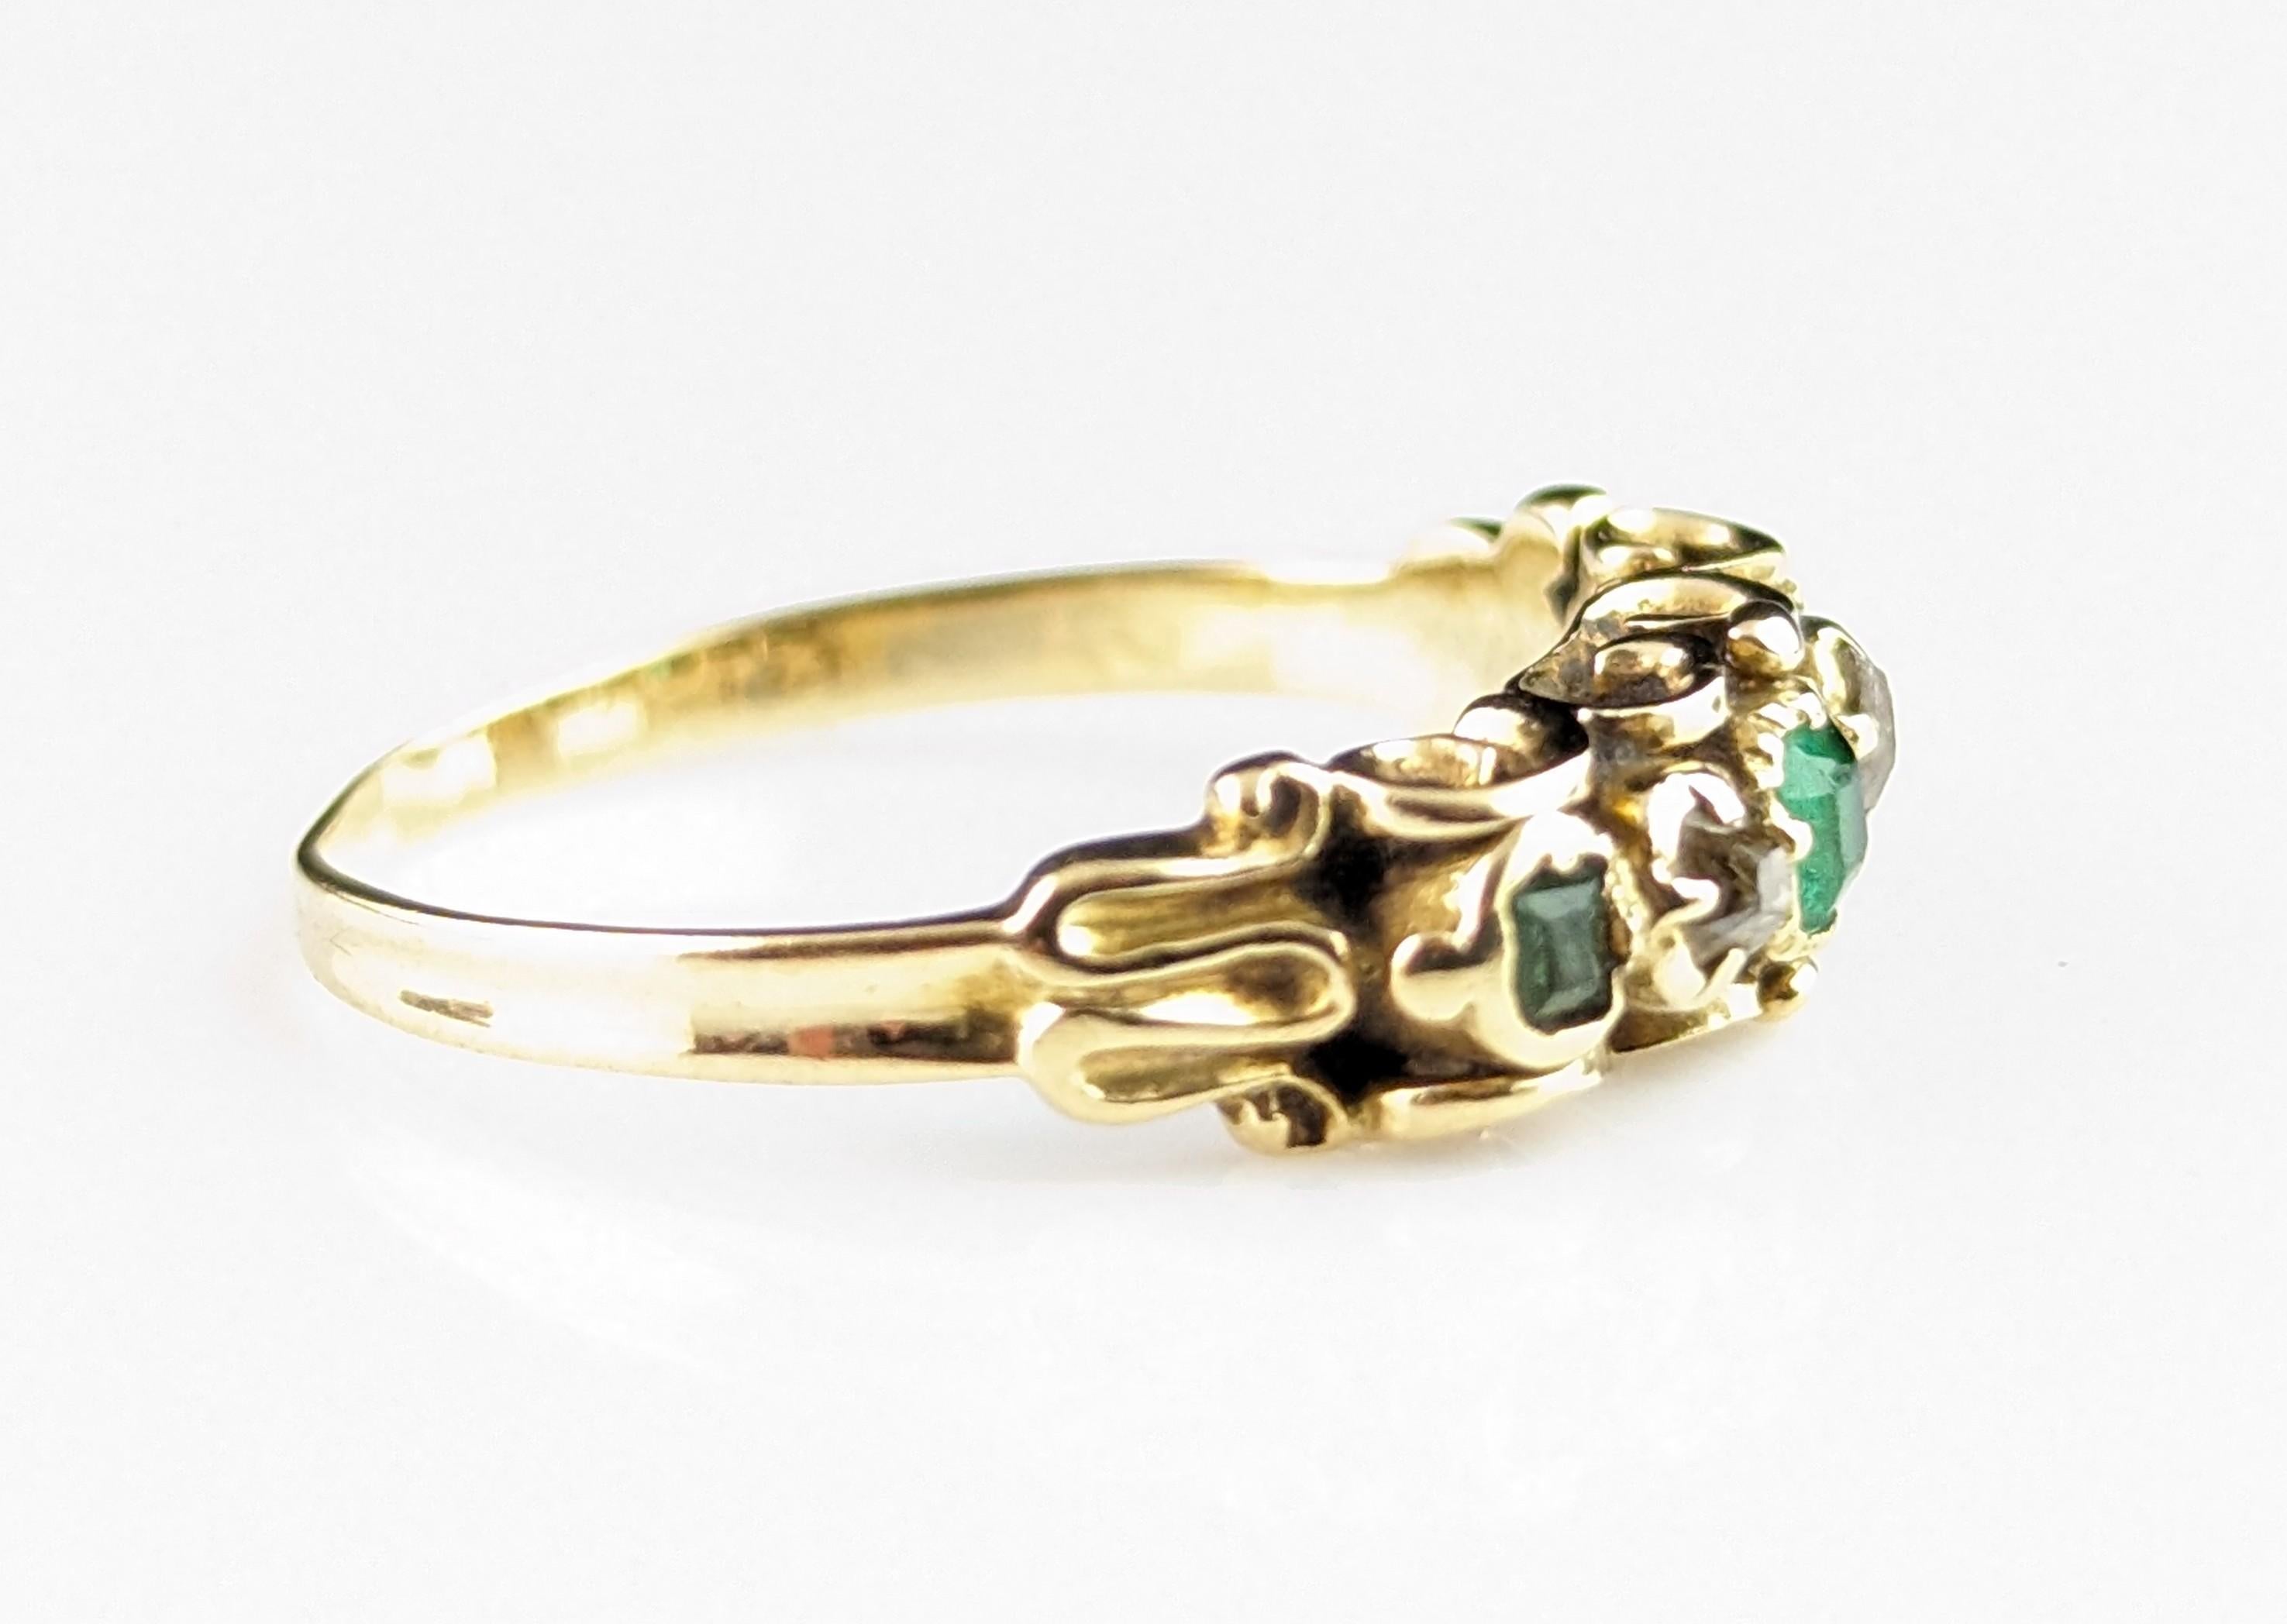 Antique Emerald and old cut diamond ring, 18k gold, Victorian five stone  3